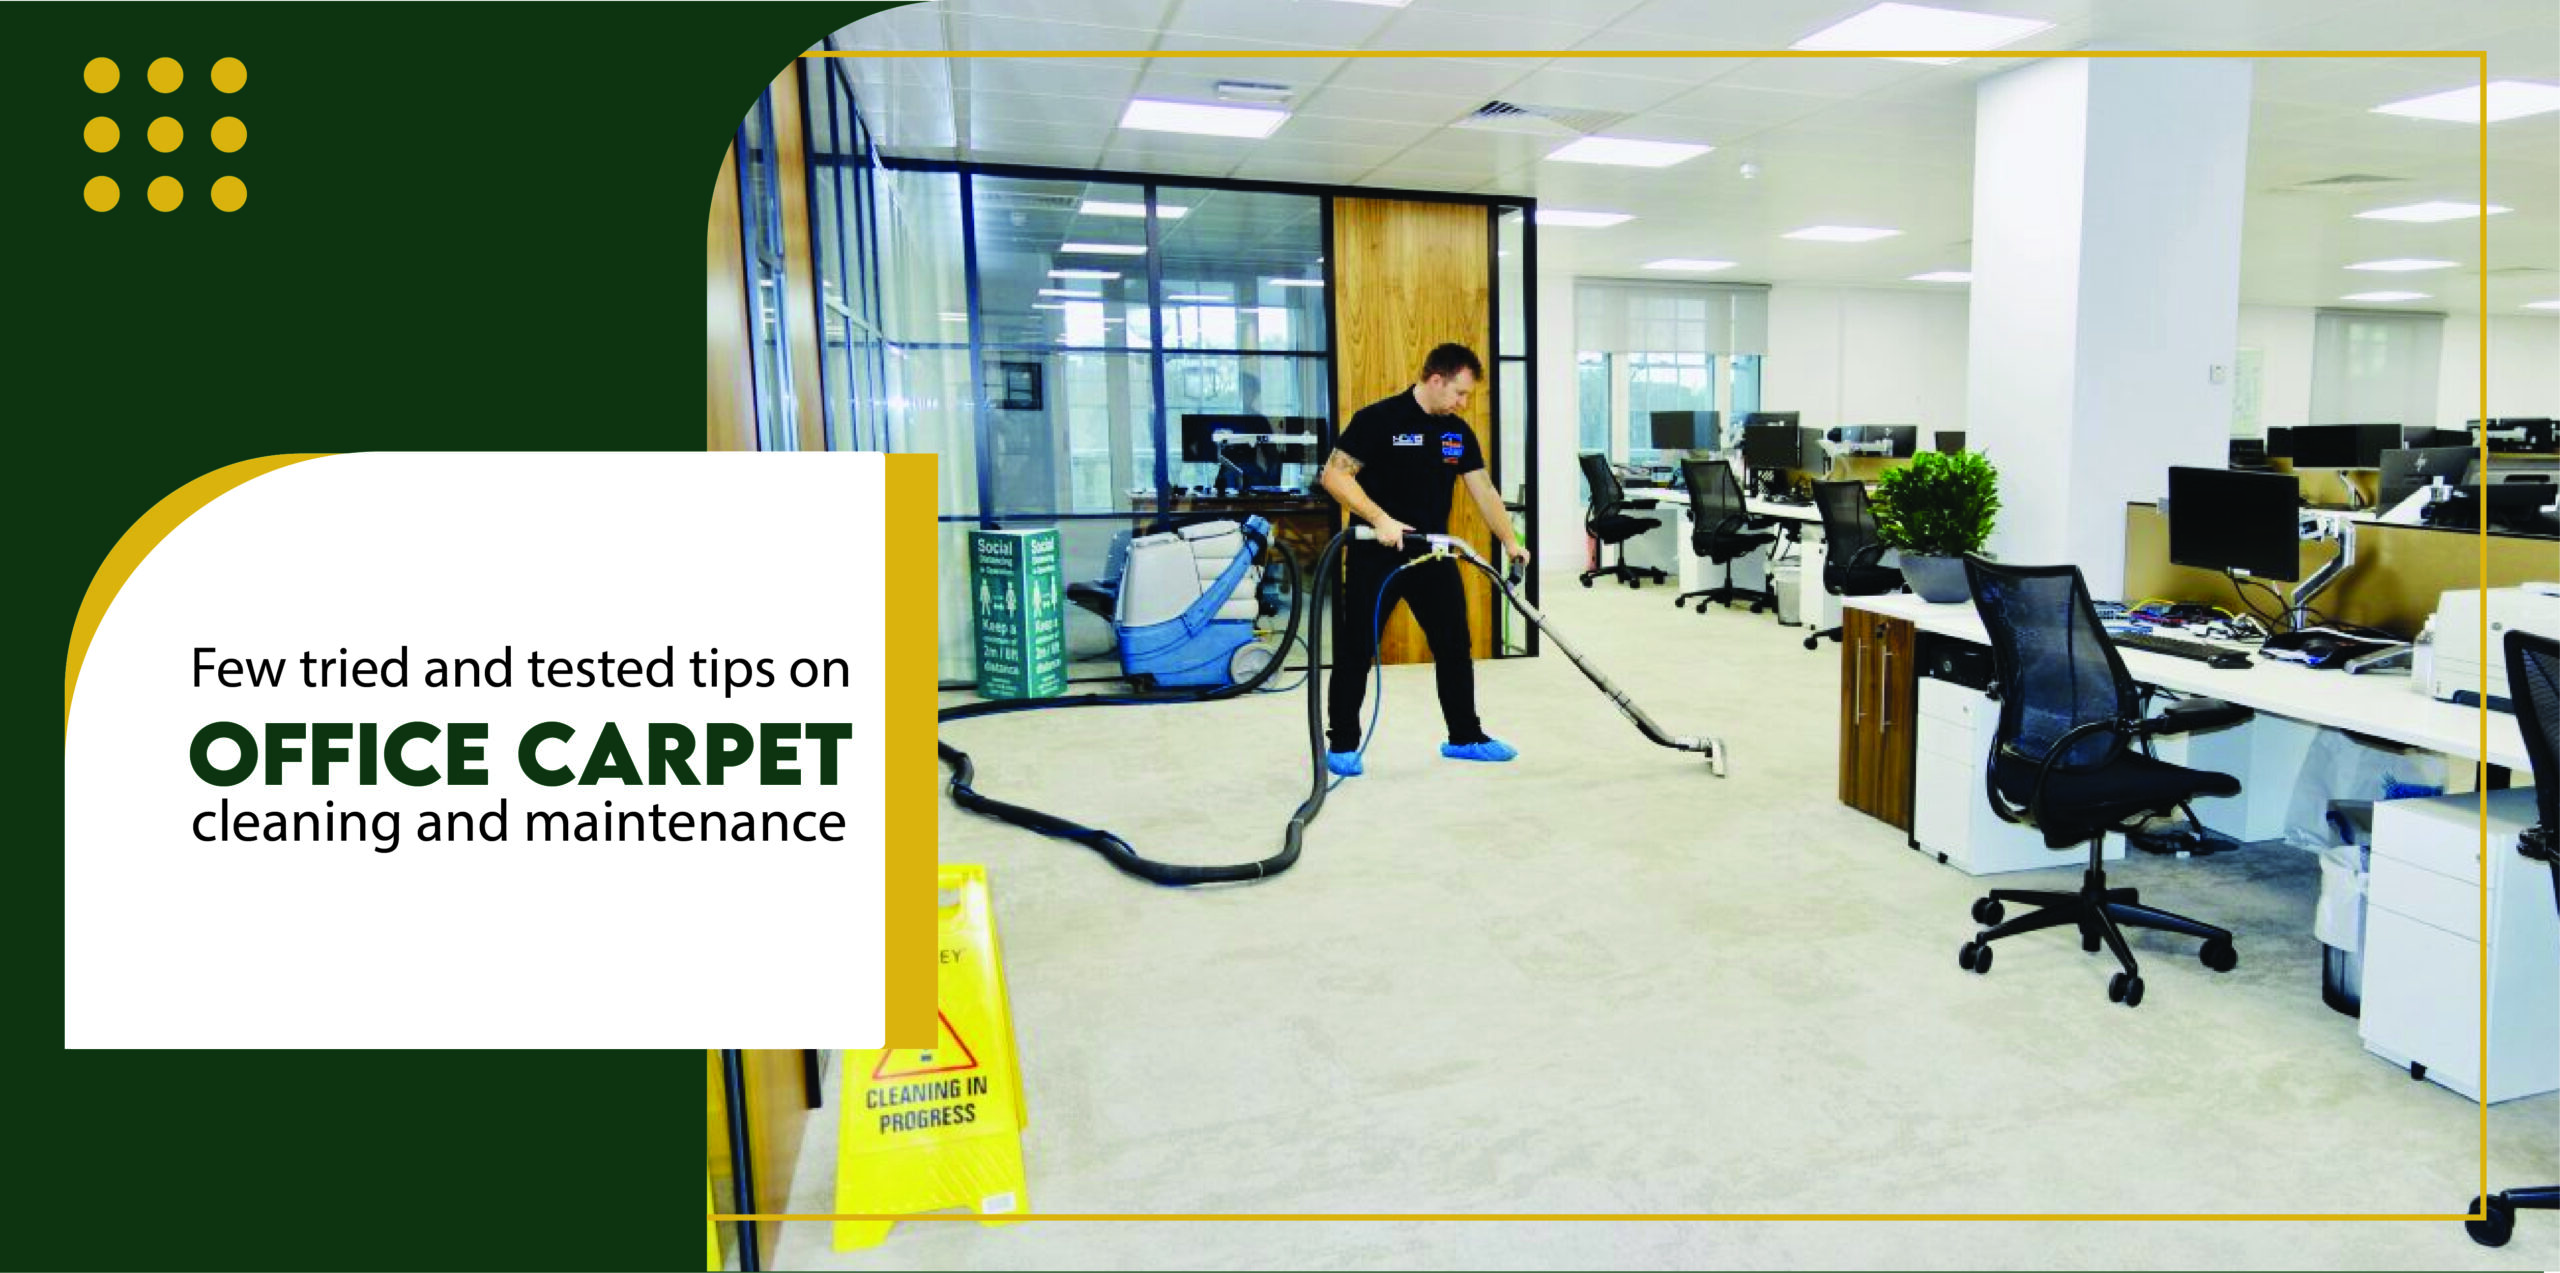 Few tried and tested tips on office carpet cleaning and maintenance